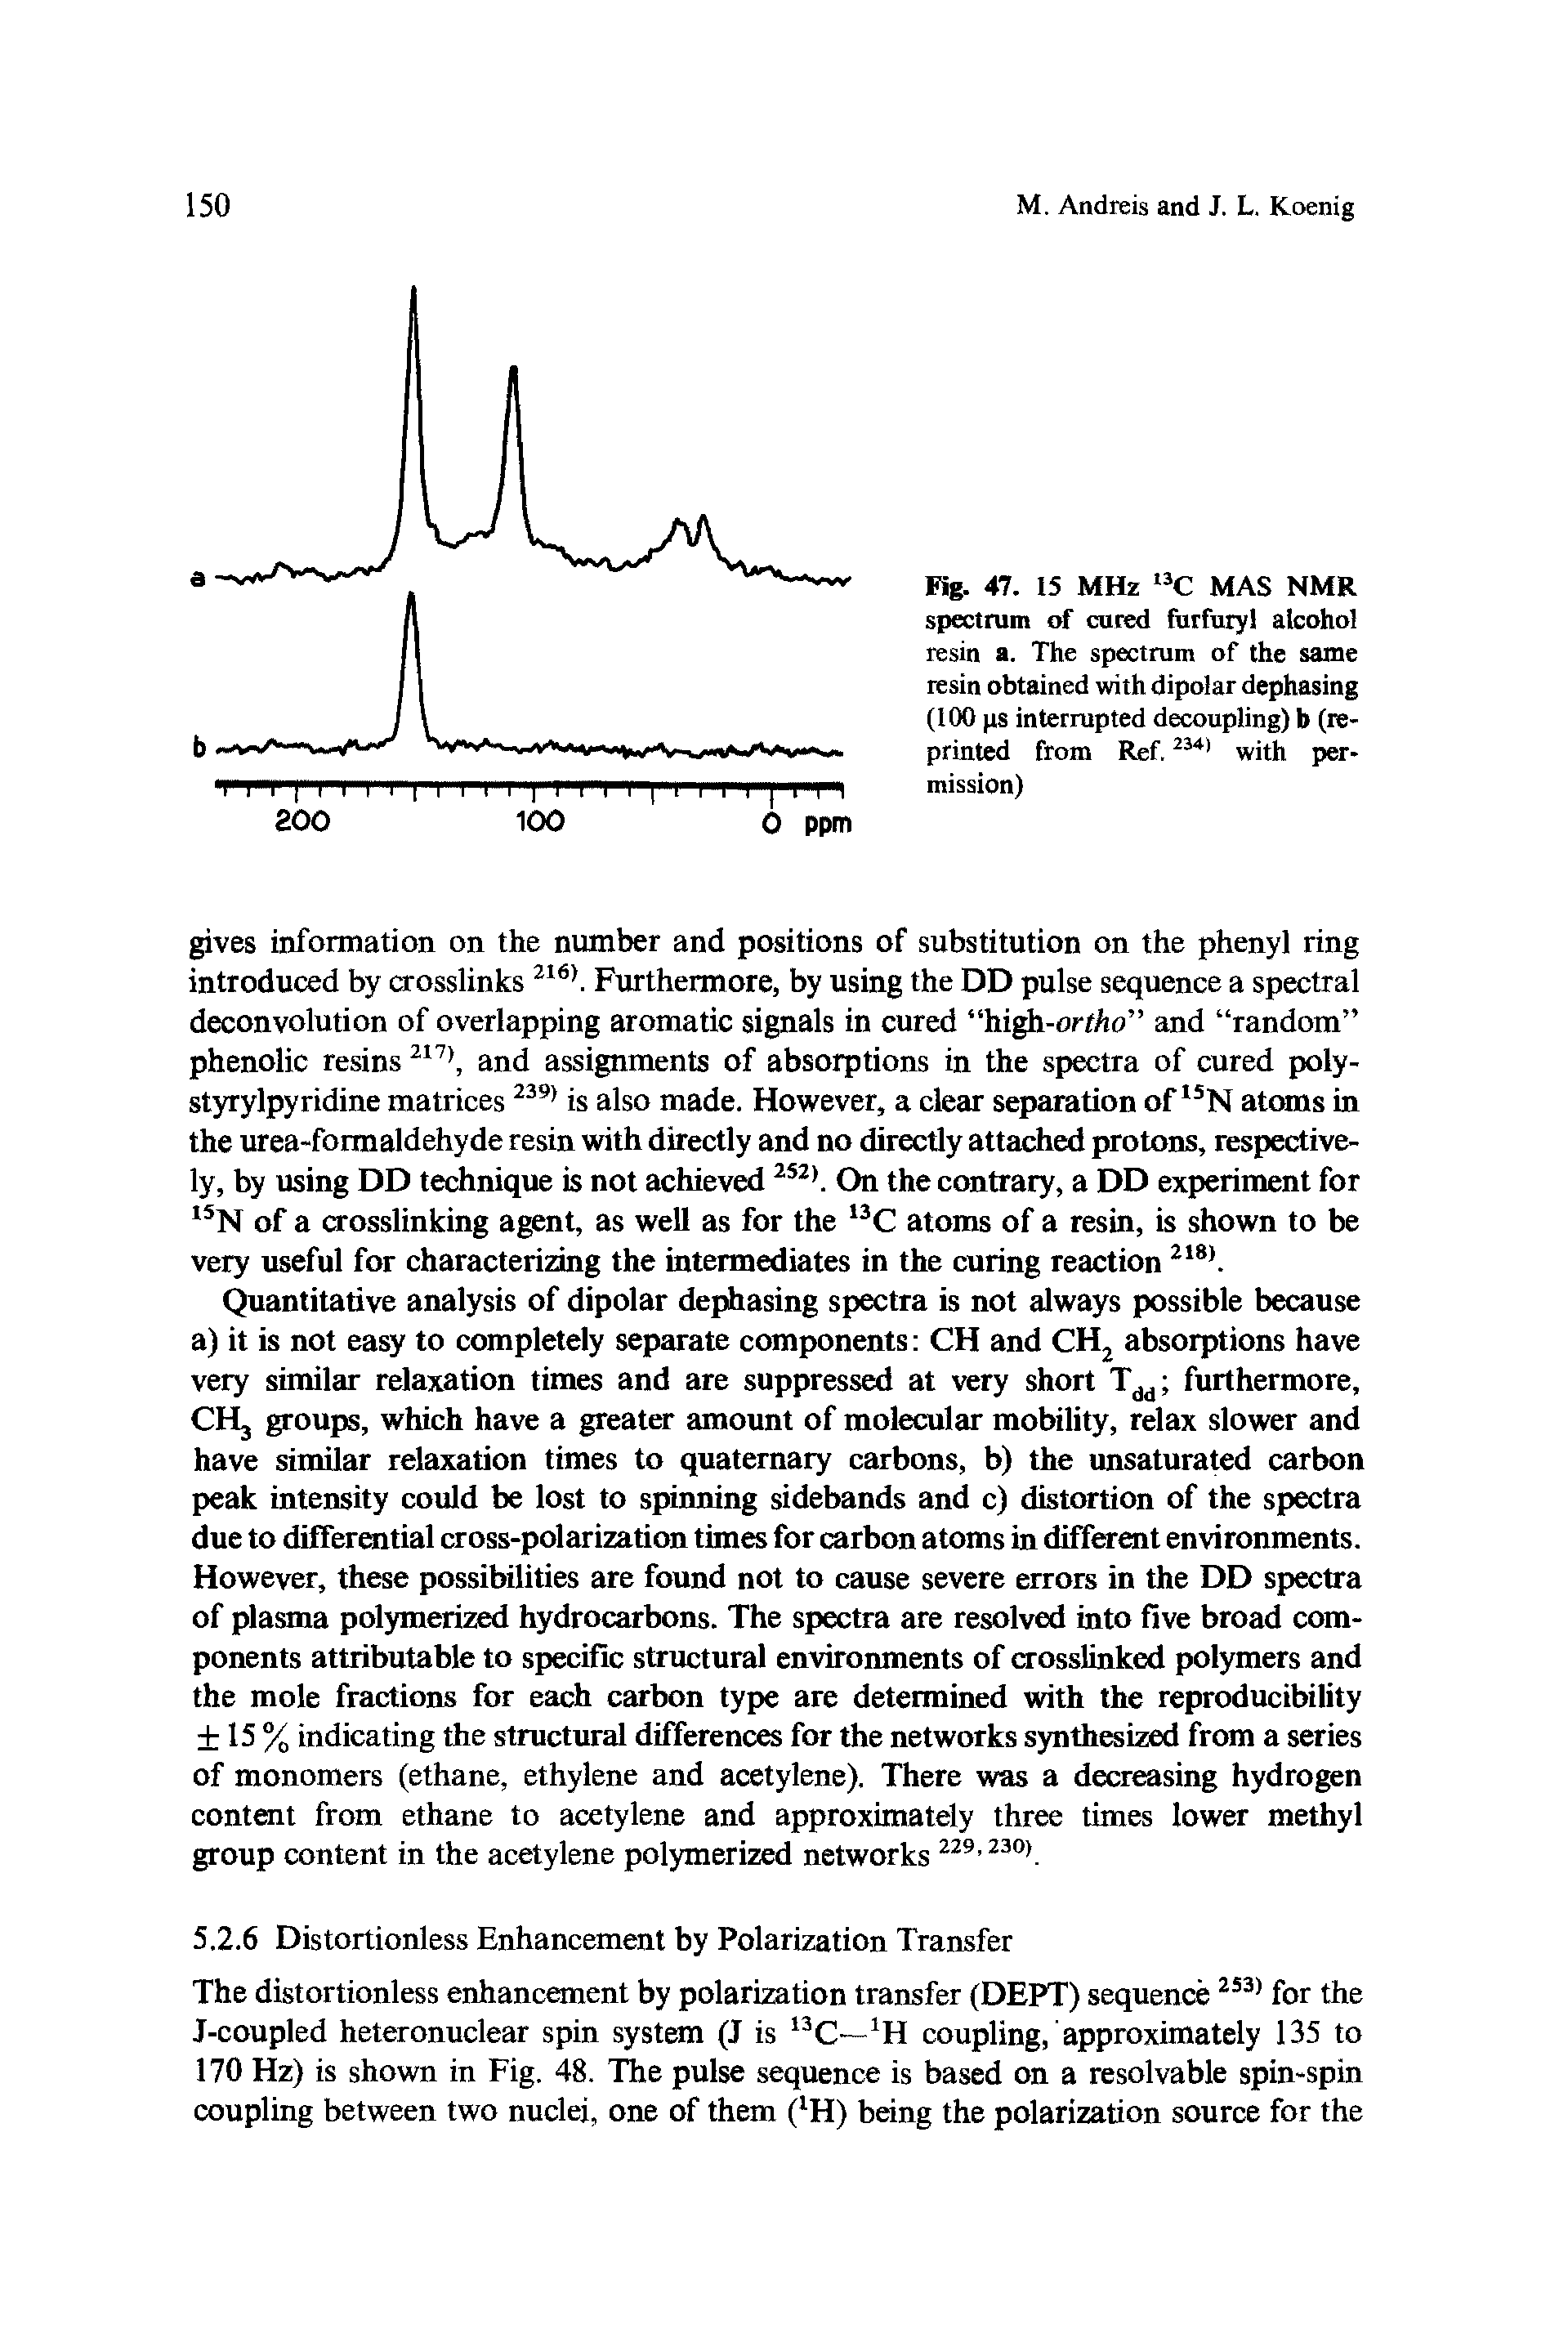 Fig. 47. 15 MHz 13C MAS NMR spectrum of cured furfuryl alcohol resin a. The spectrum of the same resin obtained with dipolar dephasing (100 ps interrupted decoupling) b (reprinted from Ref.2341 with permission)...